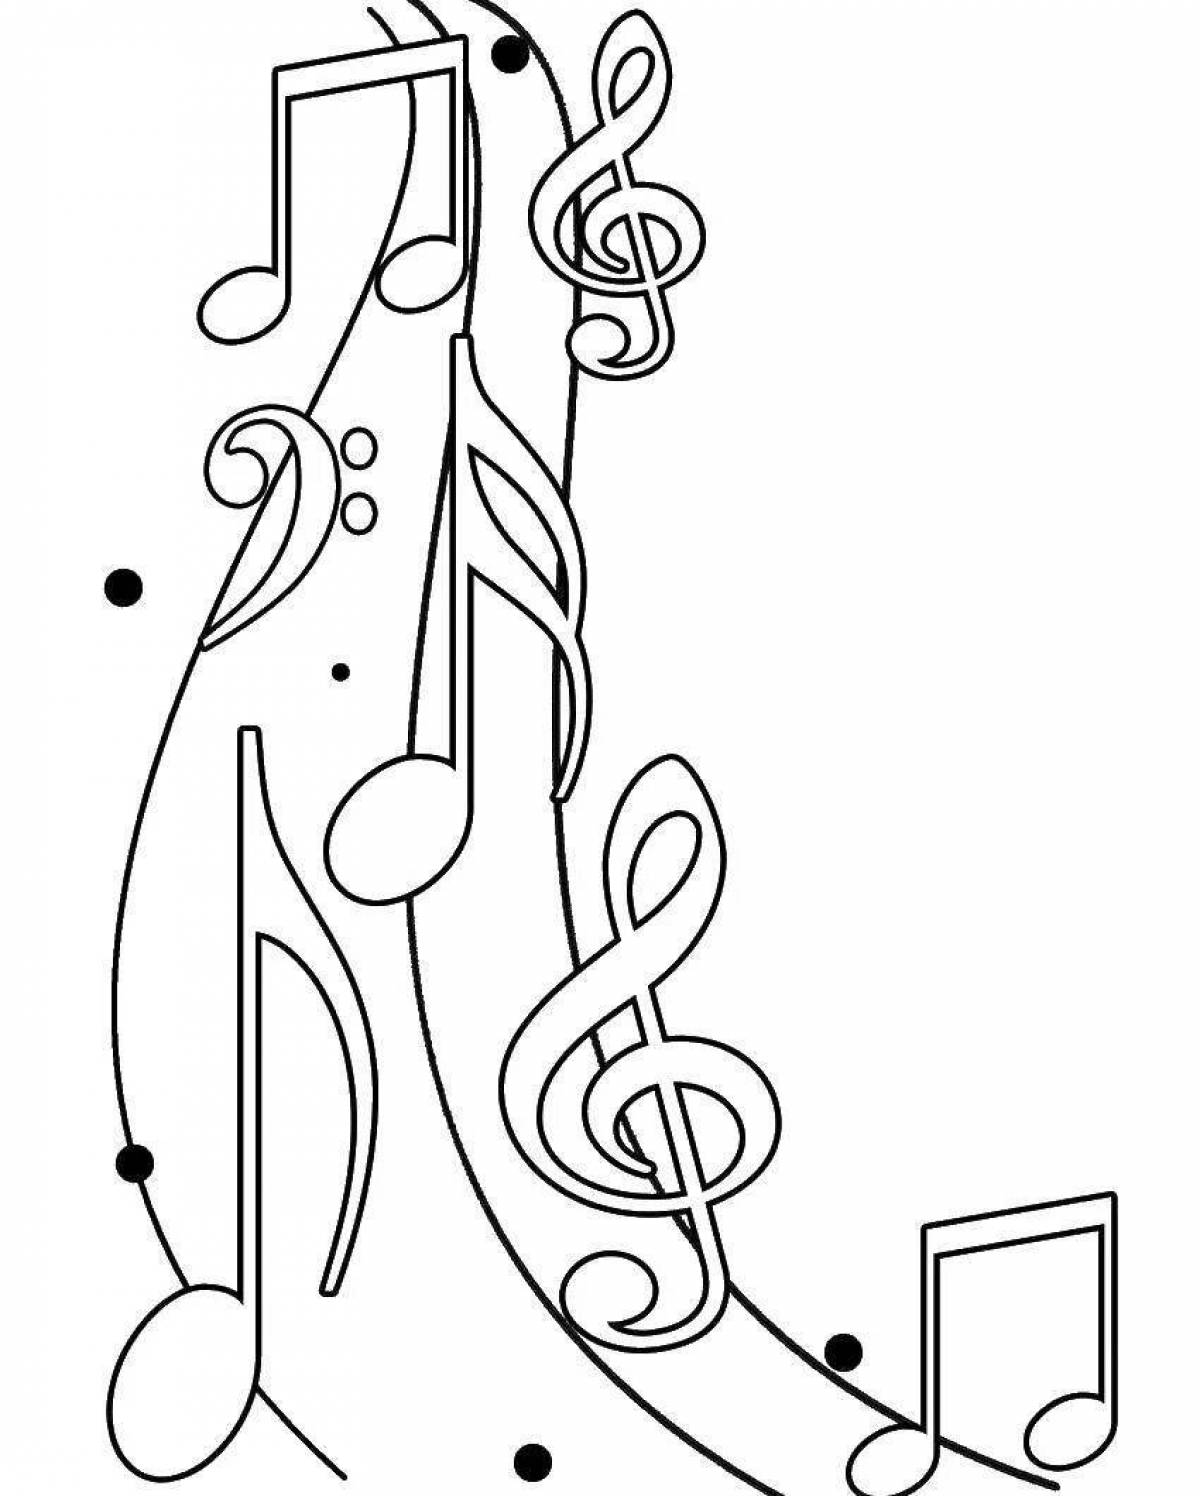 Inspirational treble clef for kids